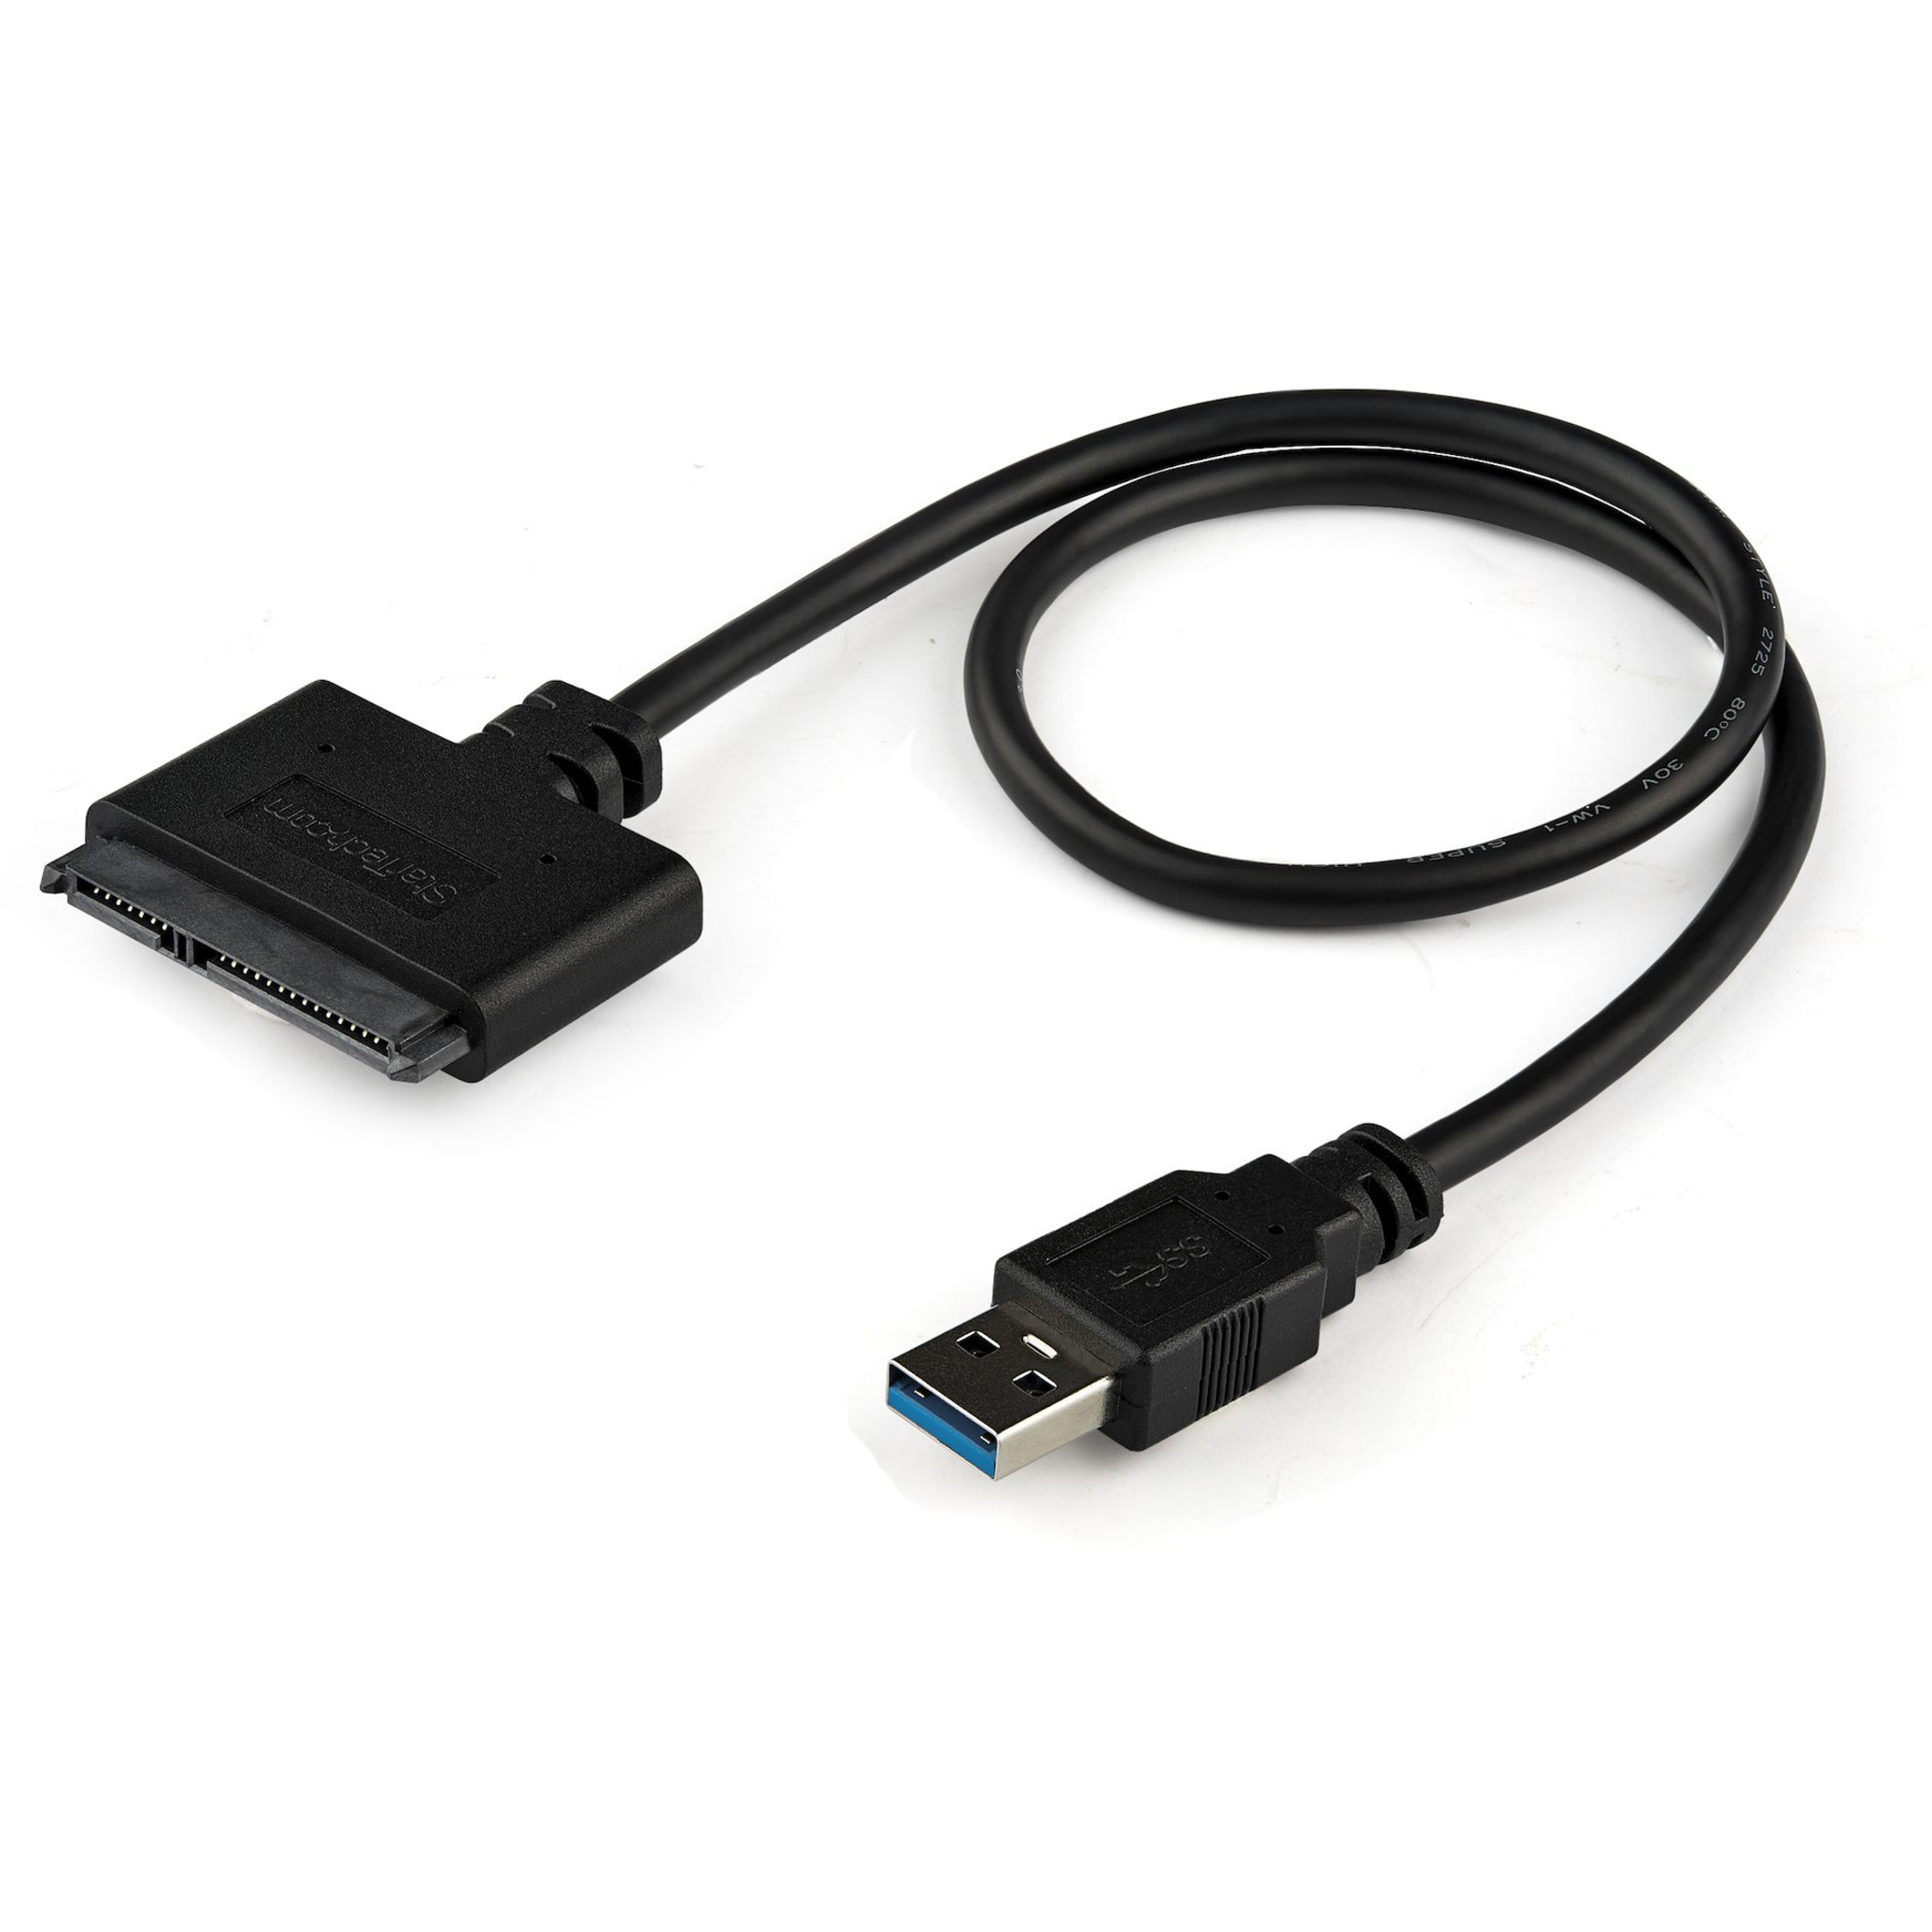 Startech .com USB 3.0 to 2.5" III Hard Drive Adapter Cable w/ UASPSATA to USB 3.0 Converter for SSD / HDDQuickly access a SATA USB3S2SAT3CB - Corporate Armor